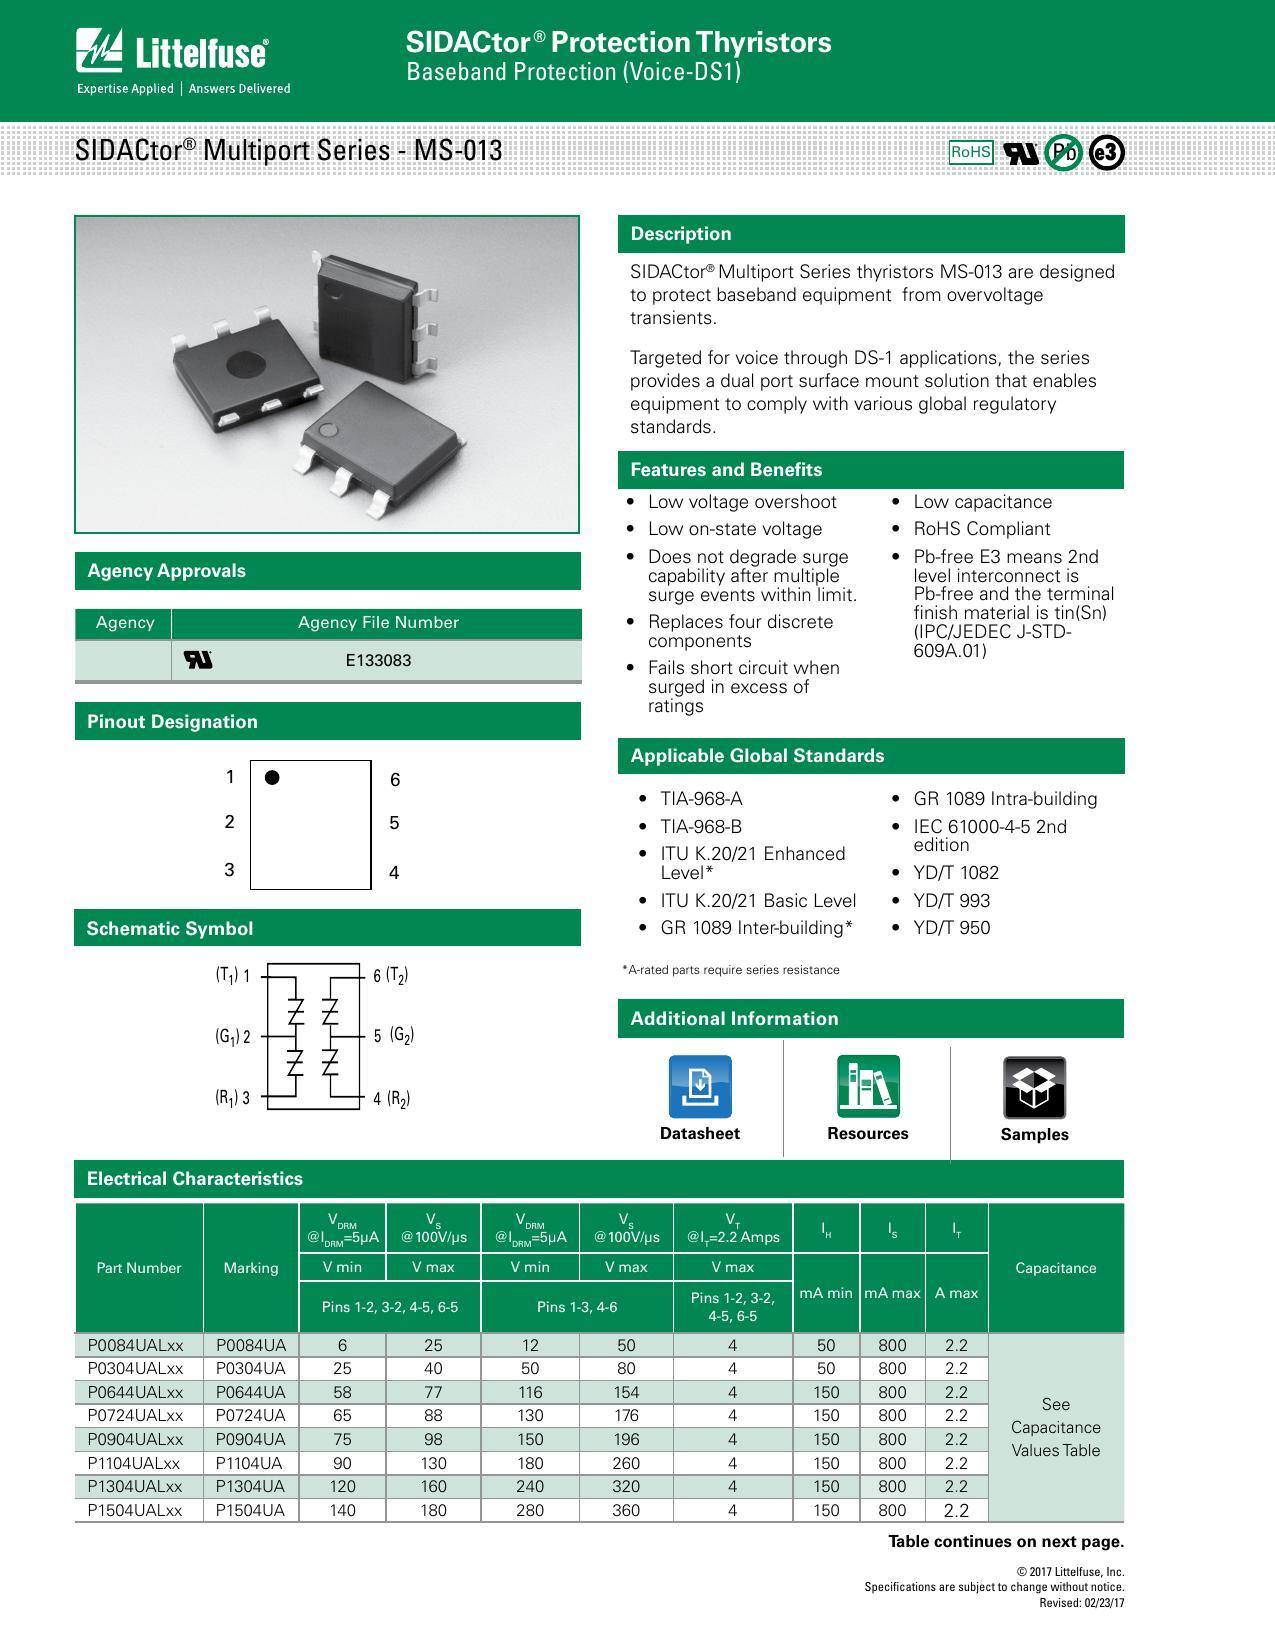 sidactor-protection-thyristors-baseband-protection-voice-dsi---multiport-series-ms-013.pdf